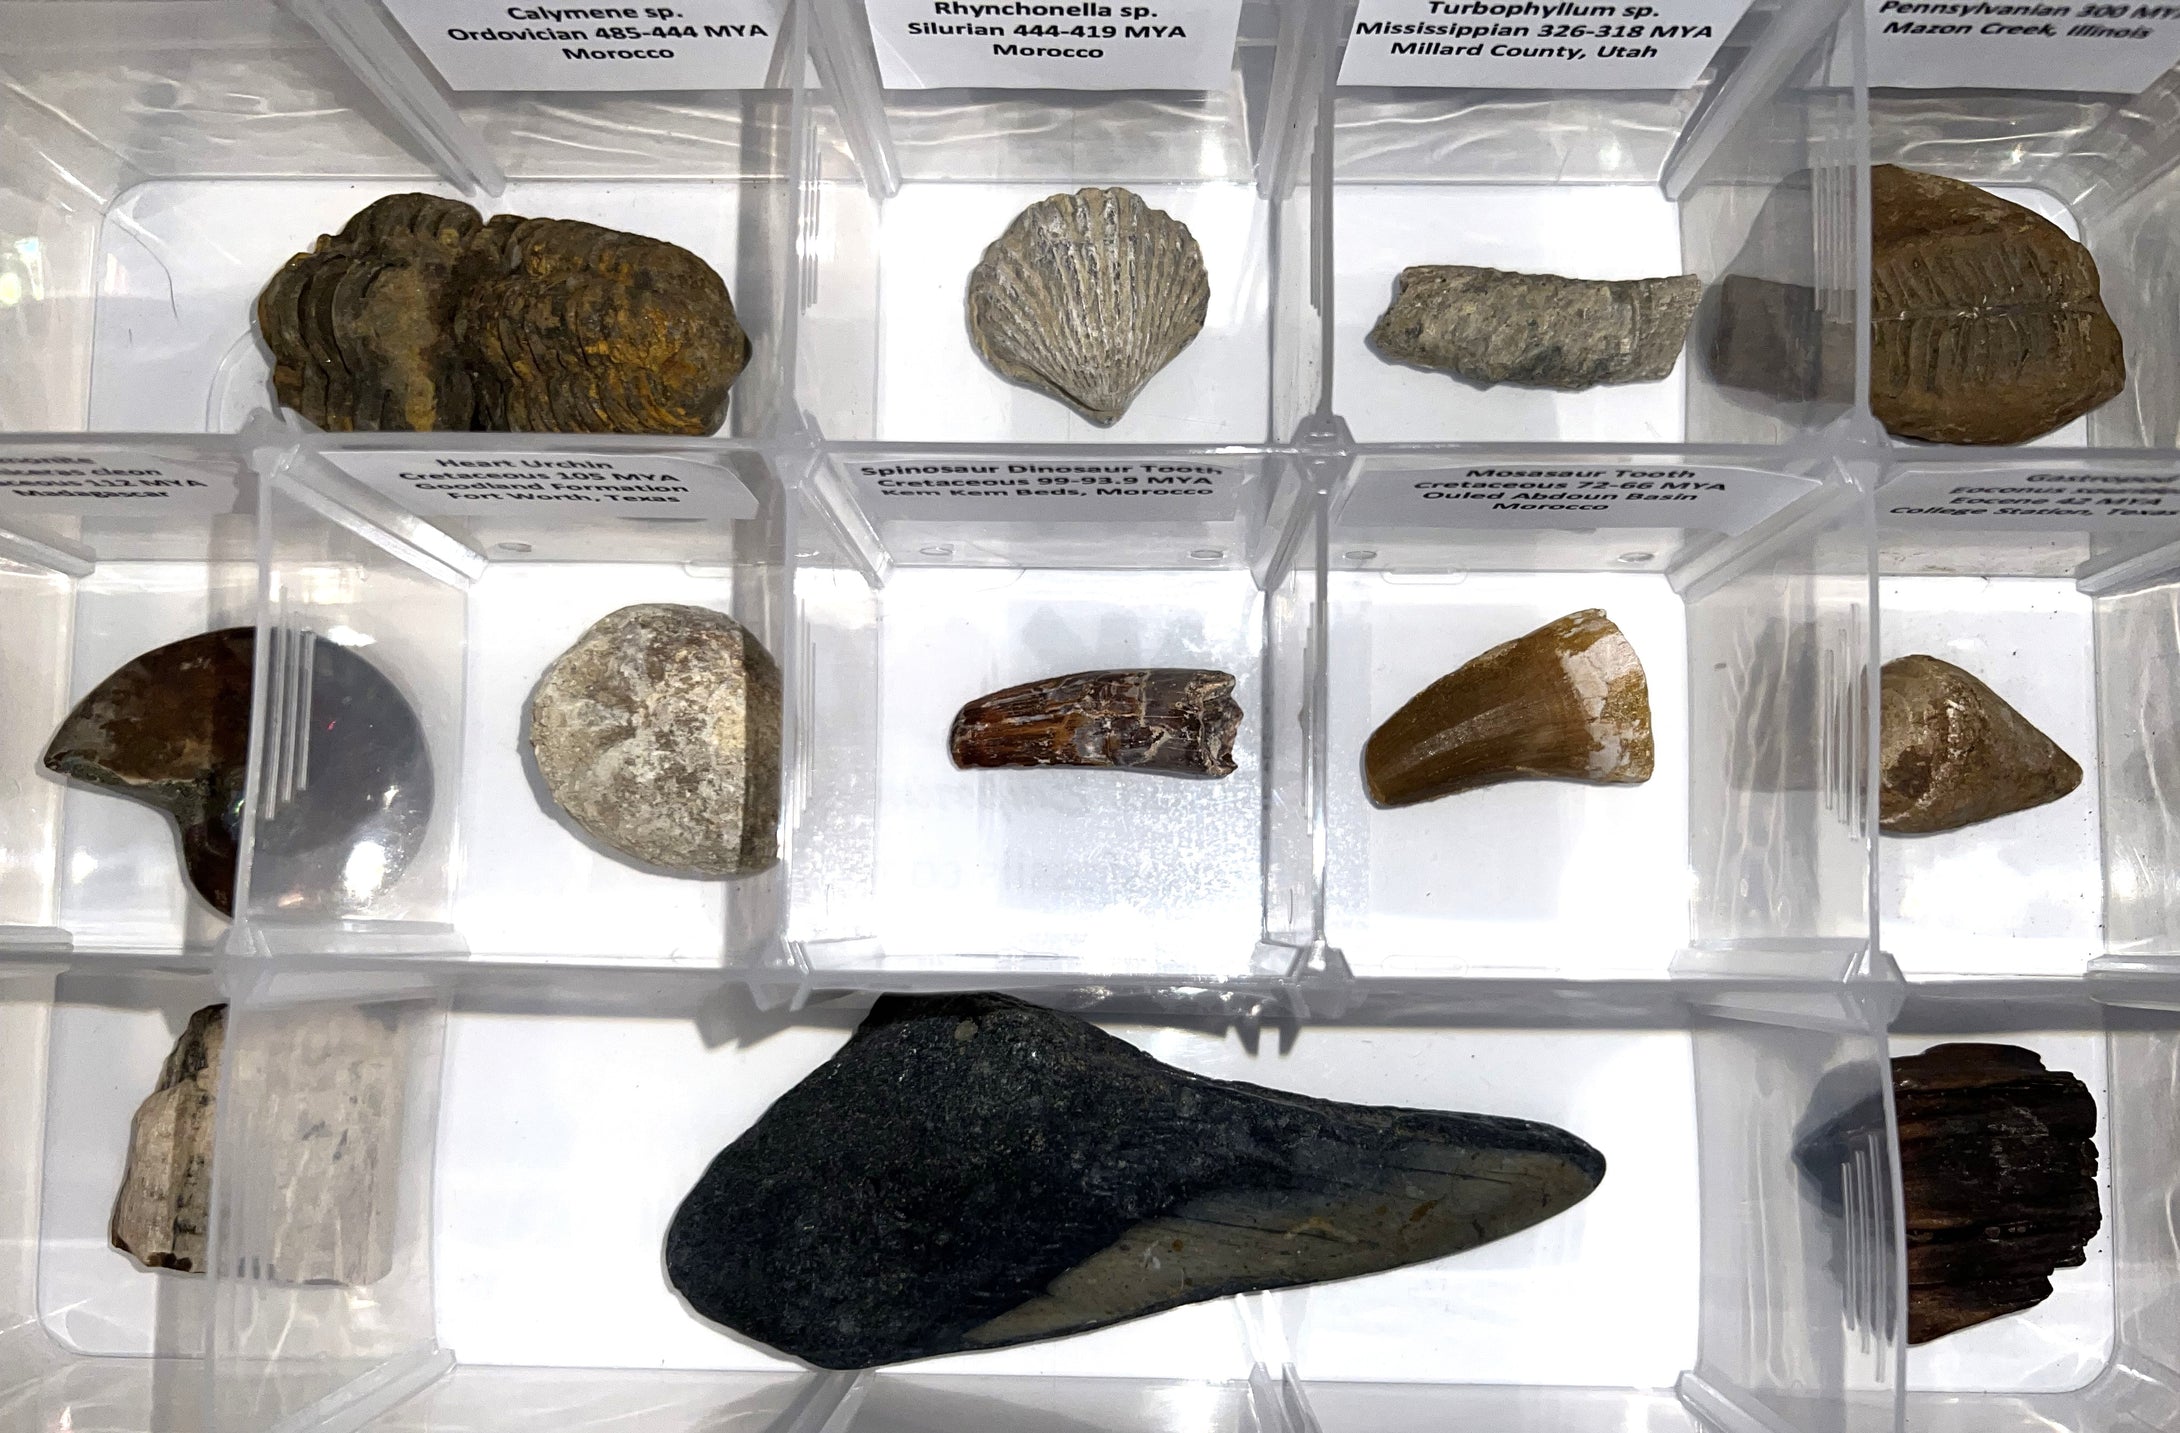 Large Beginner Collection of 12 labeled Fossils in a clear case. Includes Partial Megalodon Tooth, Trilobite, Spinosaur Tooth and more!